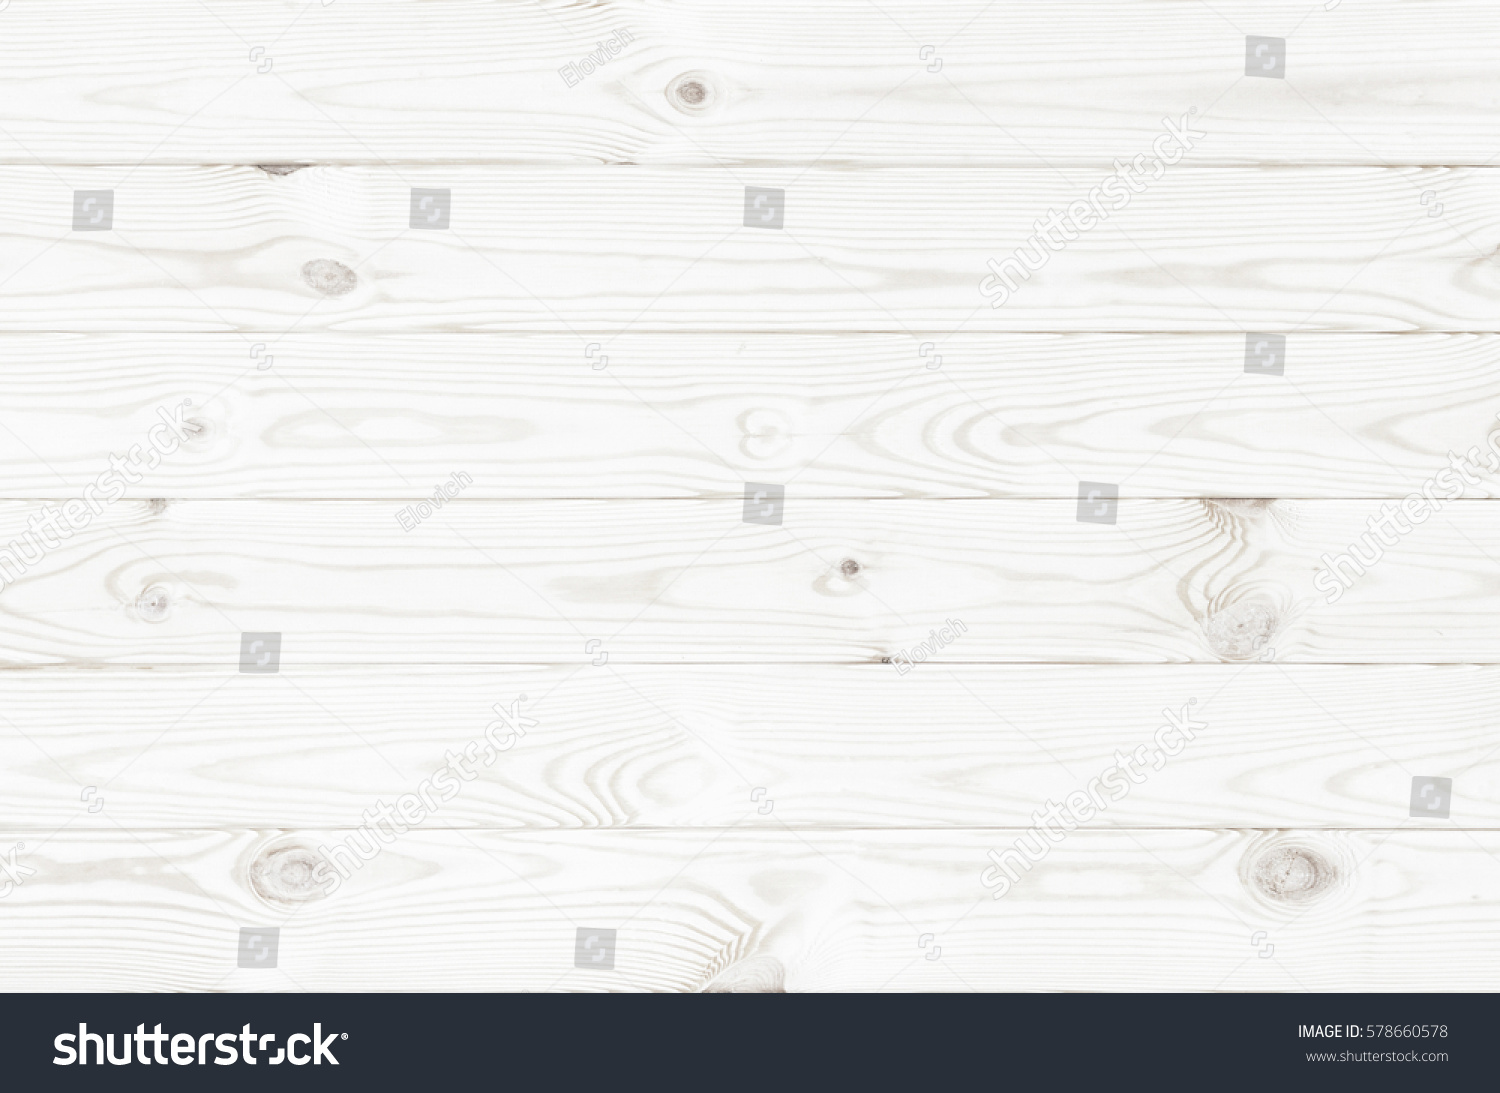 white wood texture background, wooden table top view #578660578